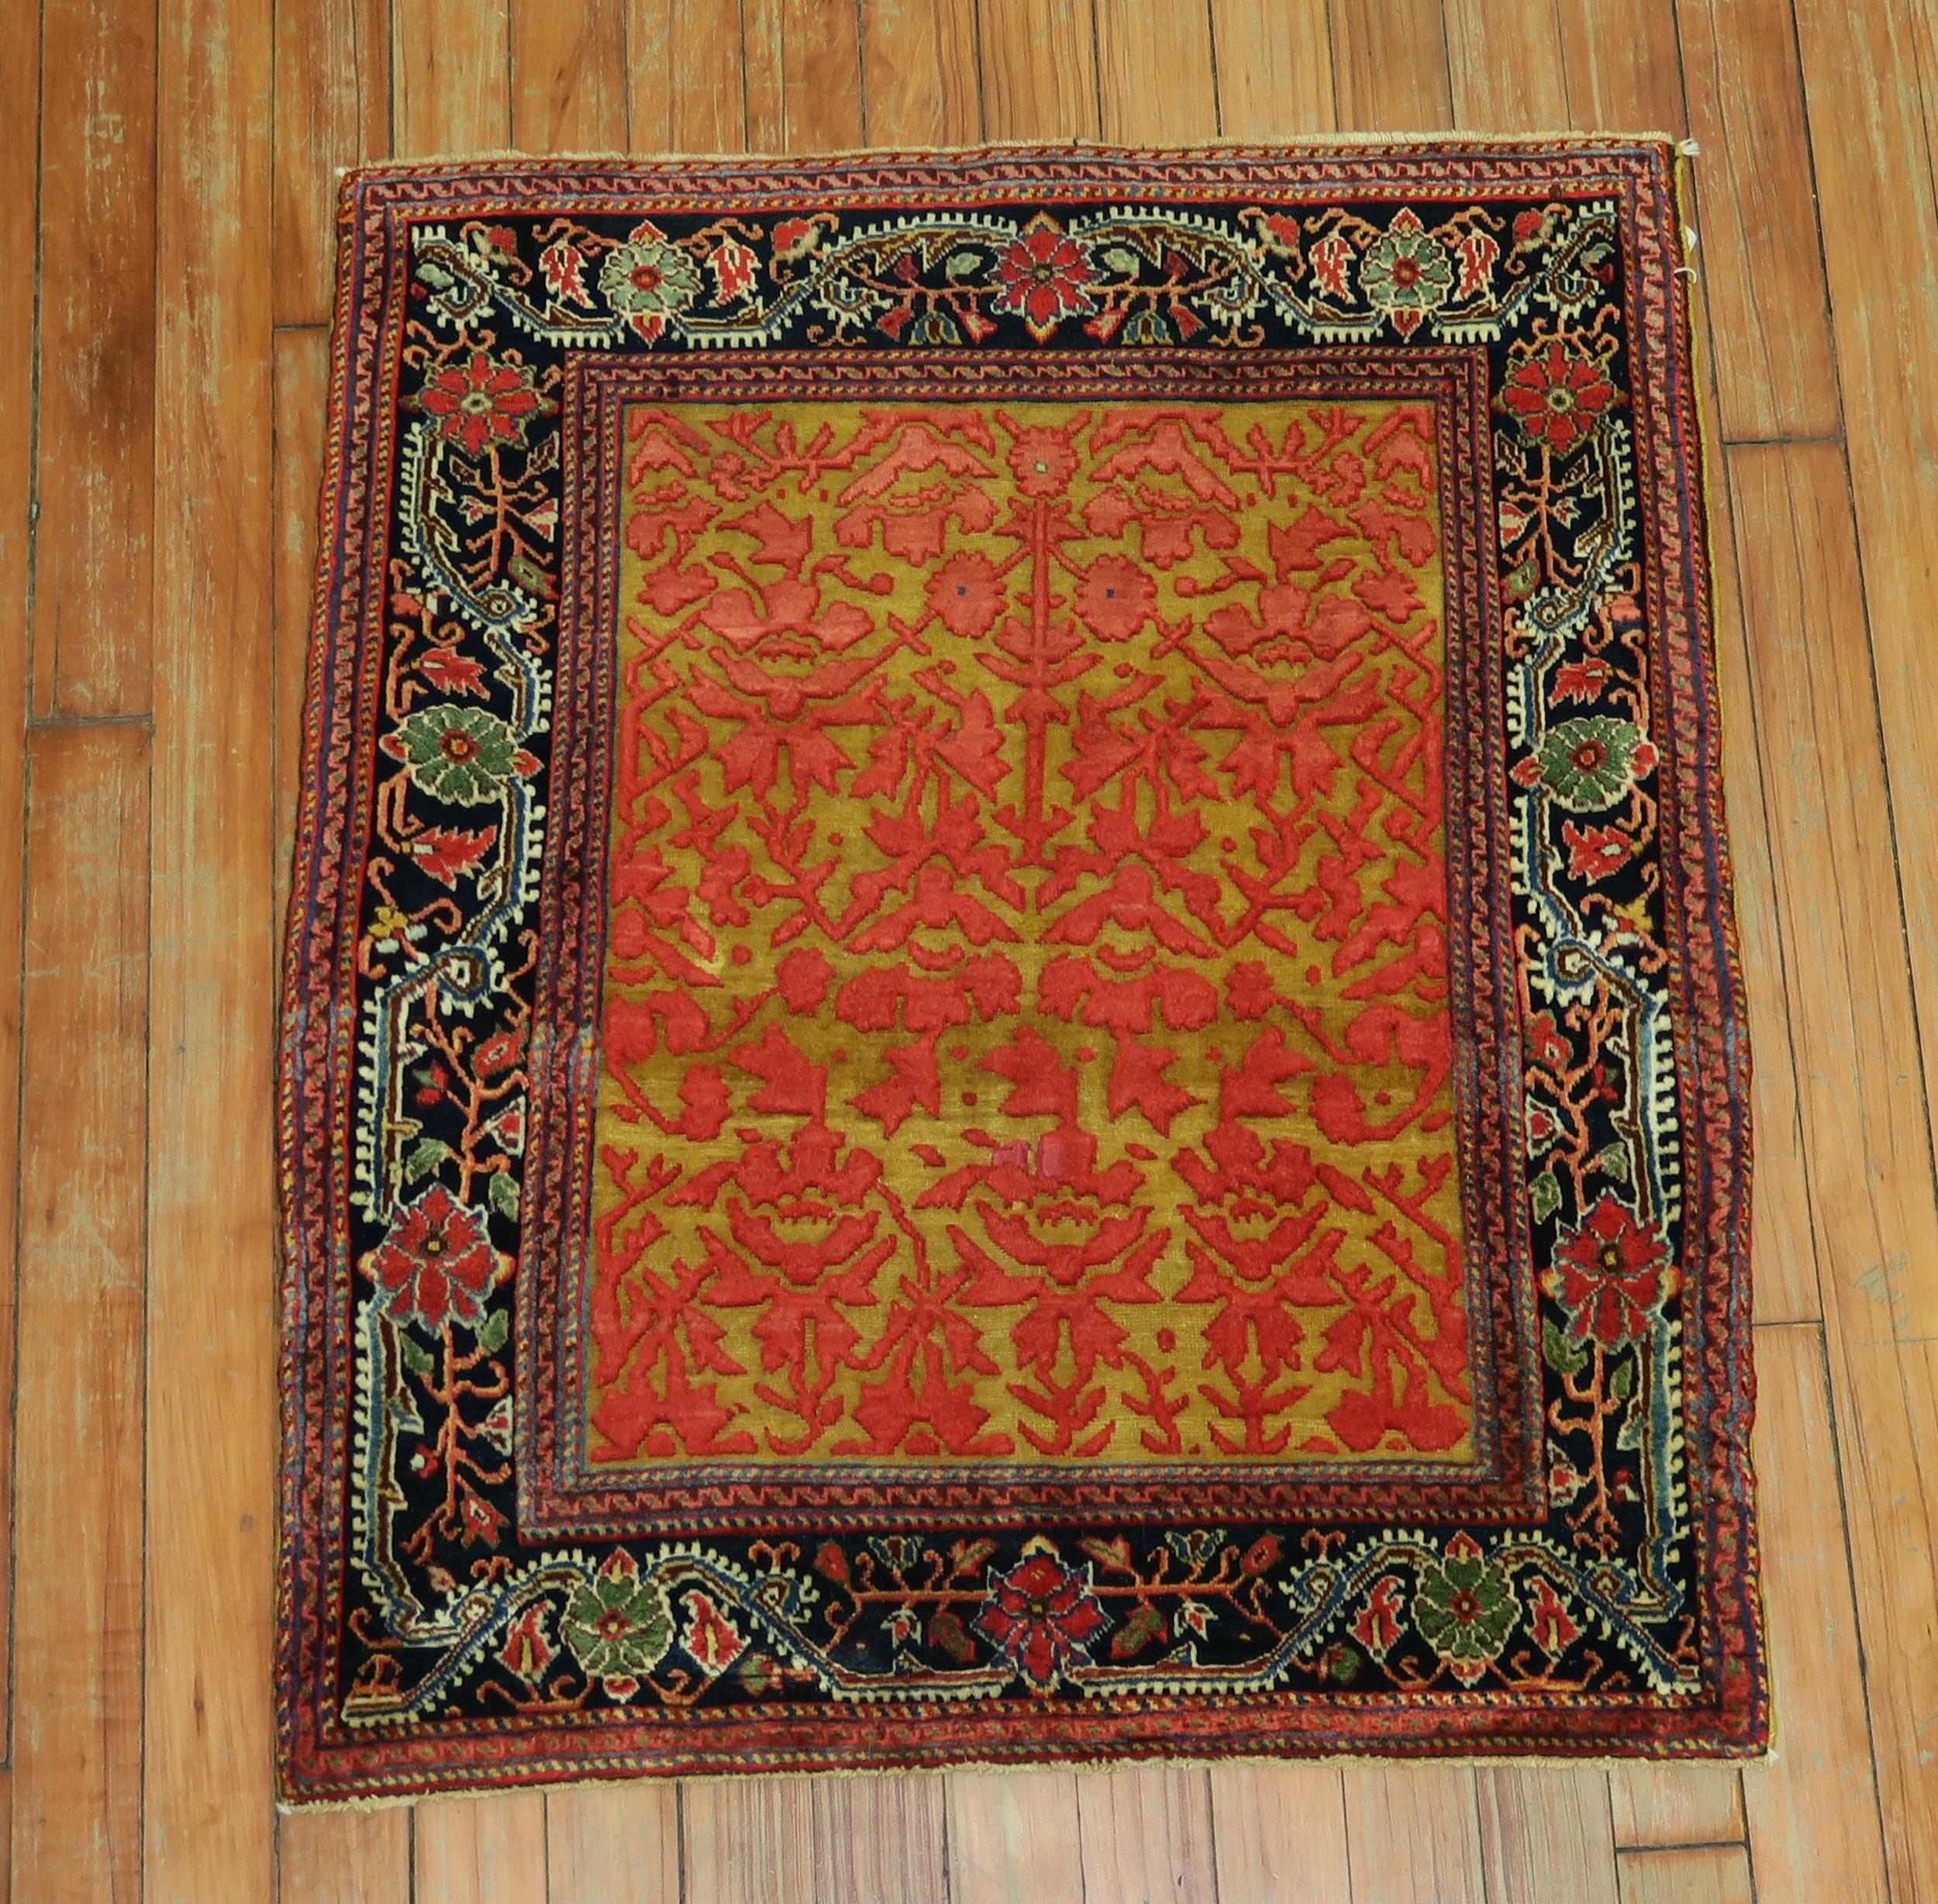 Jewel Tone Early 20th Century Superfine Quality Antique Persian Jozan Souf Mat For Sale 2